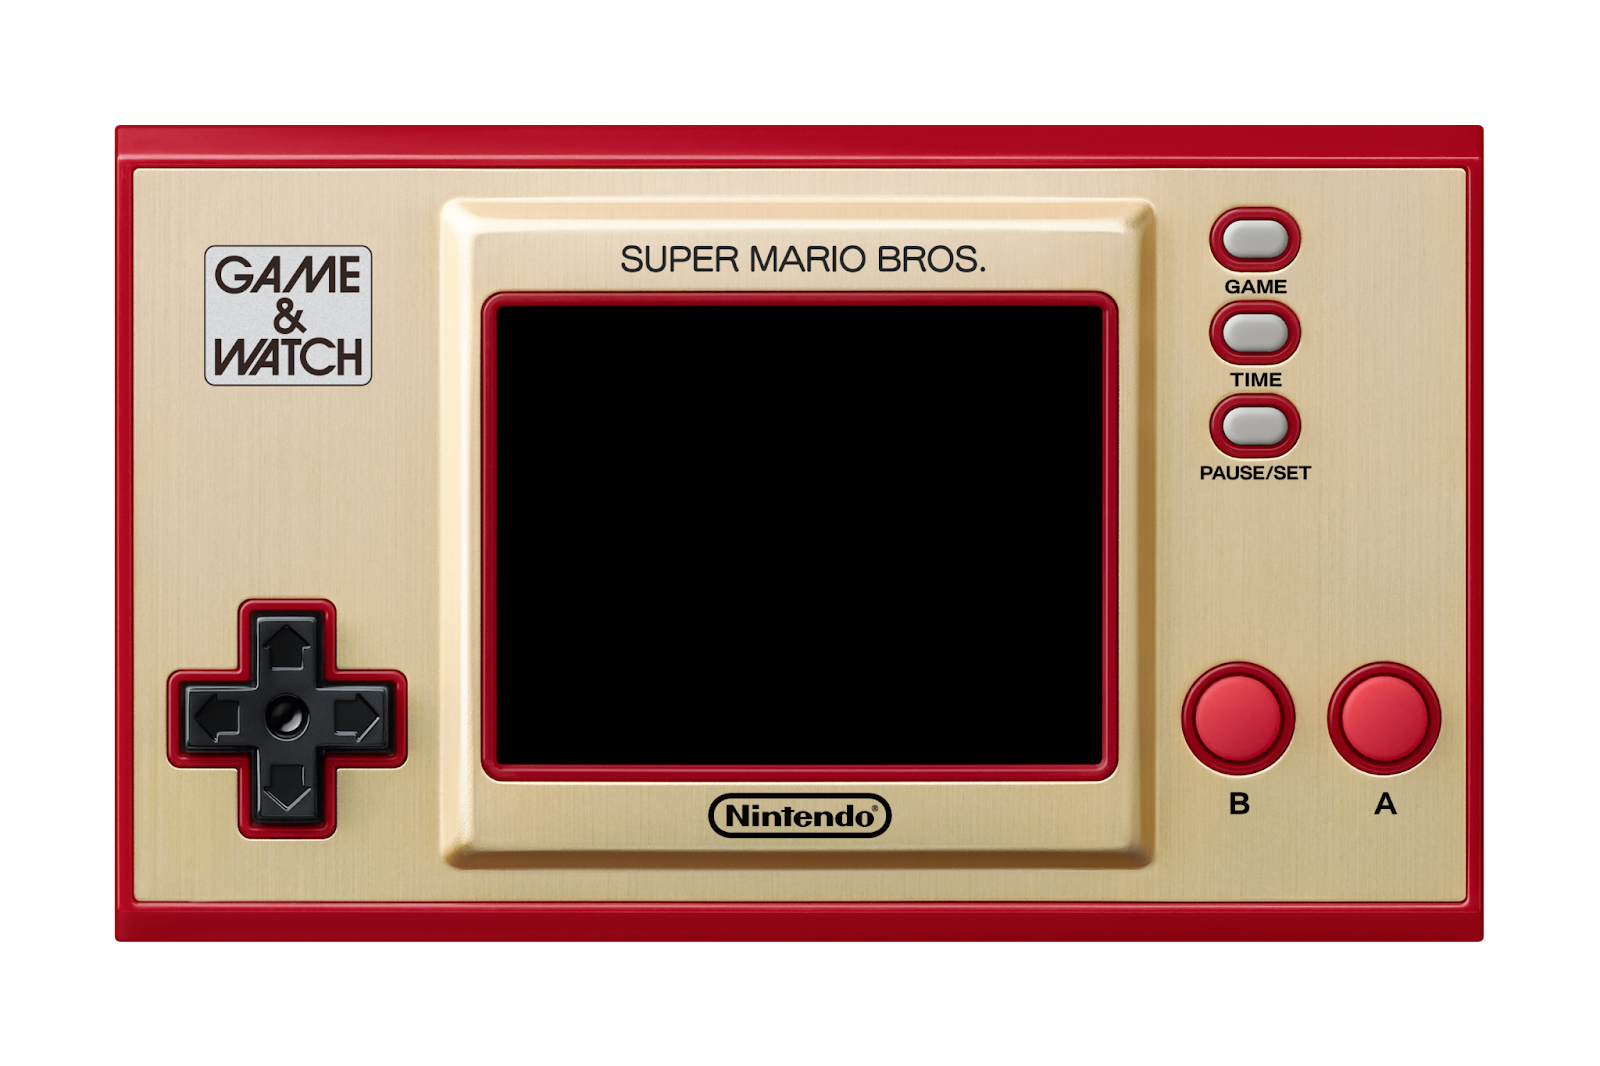 Own a Piece of Nintendo History with the Game & Watch: Super Mario Bros  Handheld